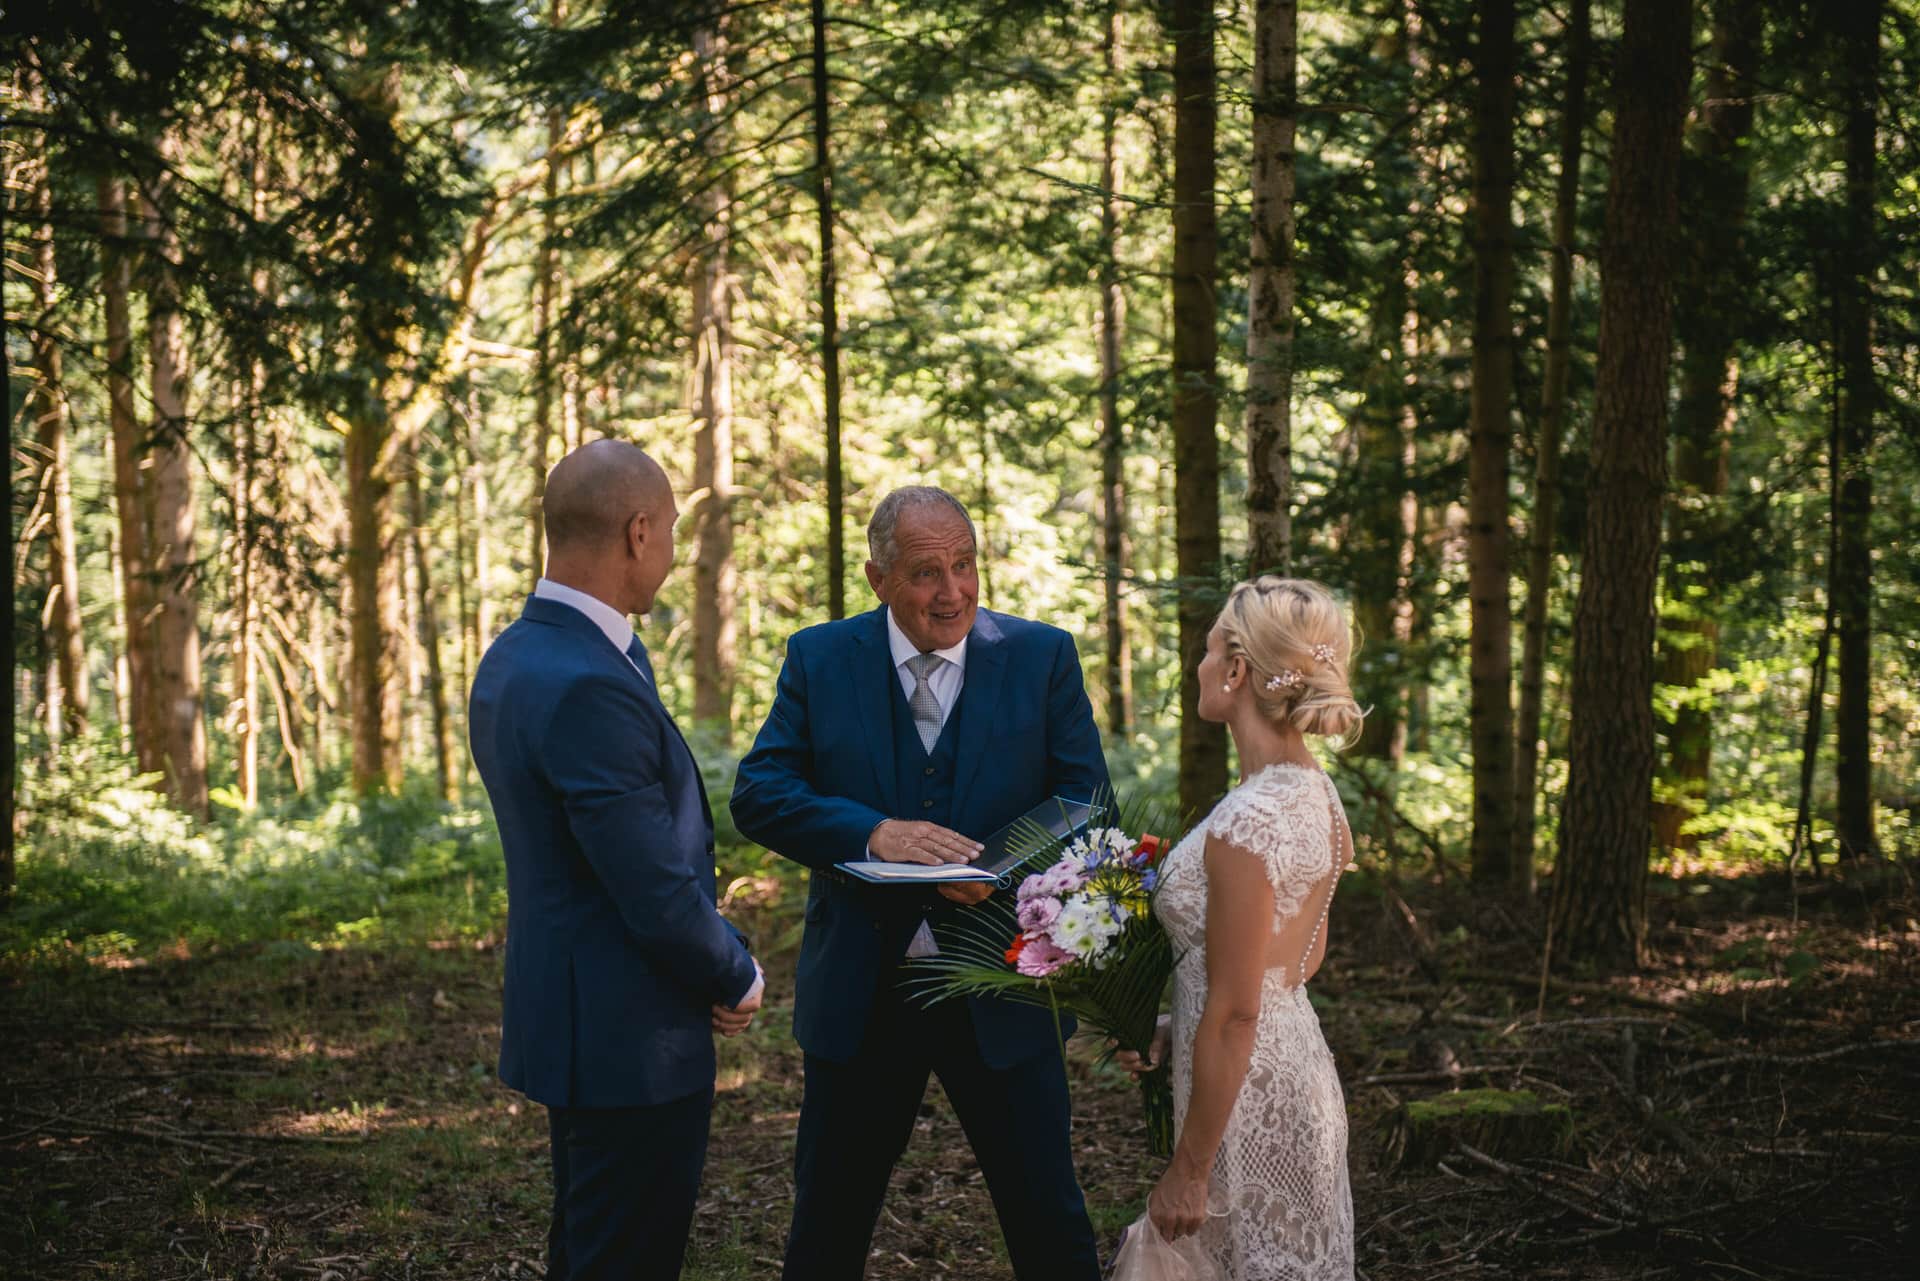 Elopement ceremony in a forest in Central France with a male celebrant